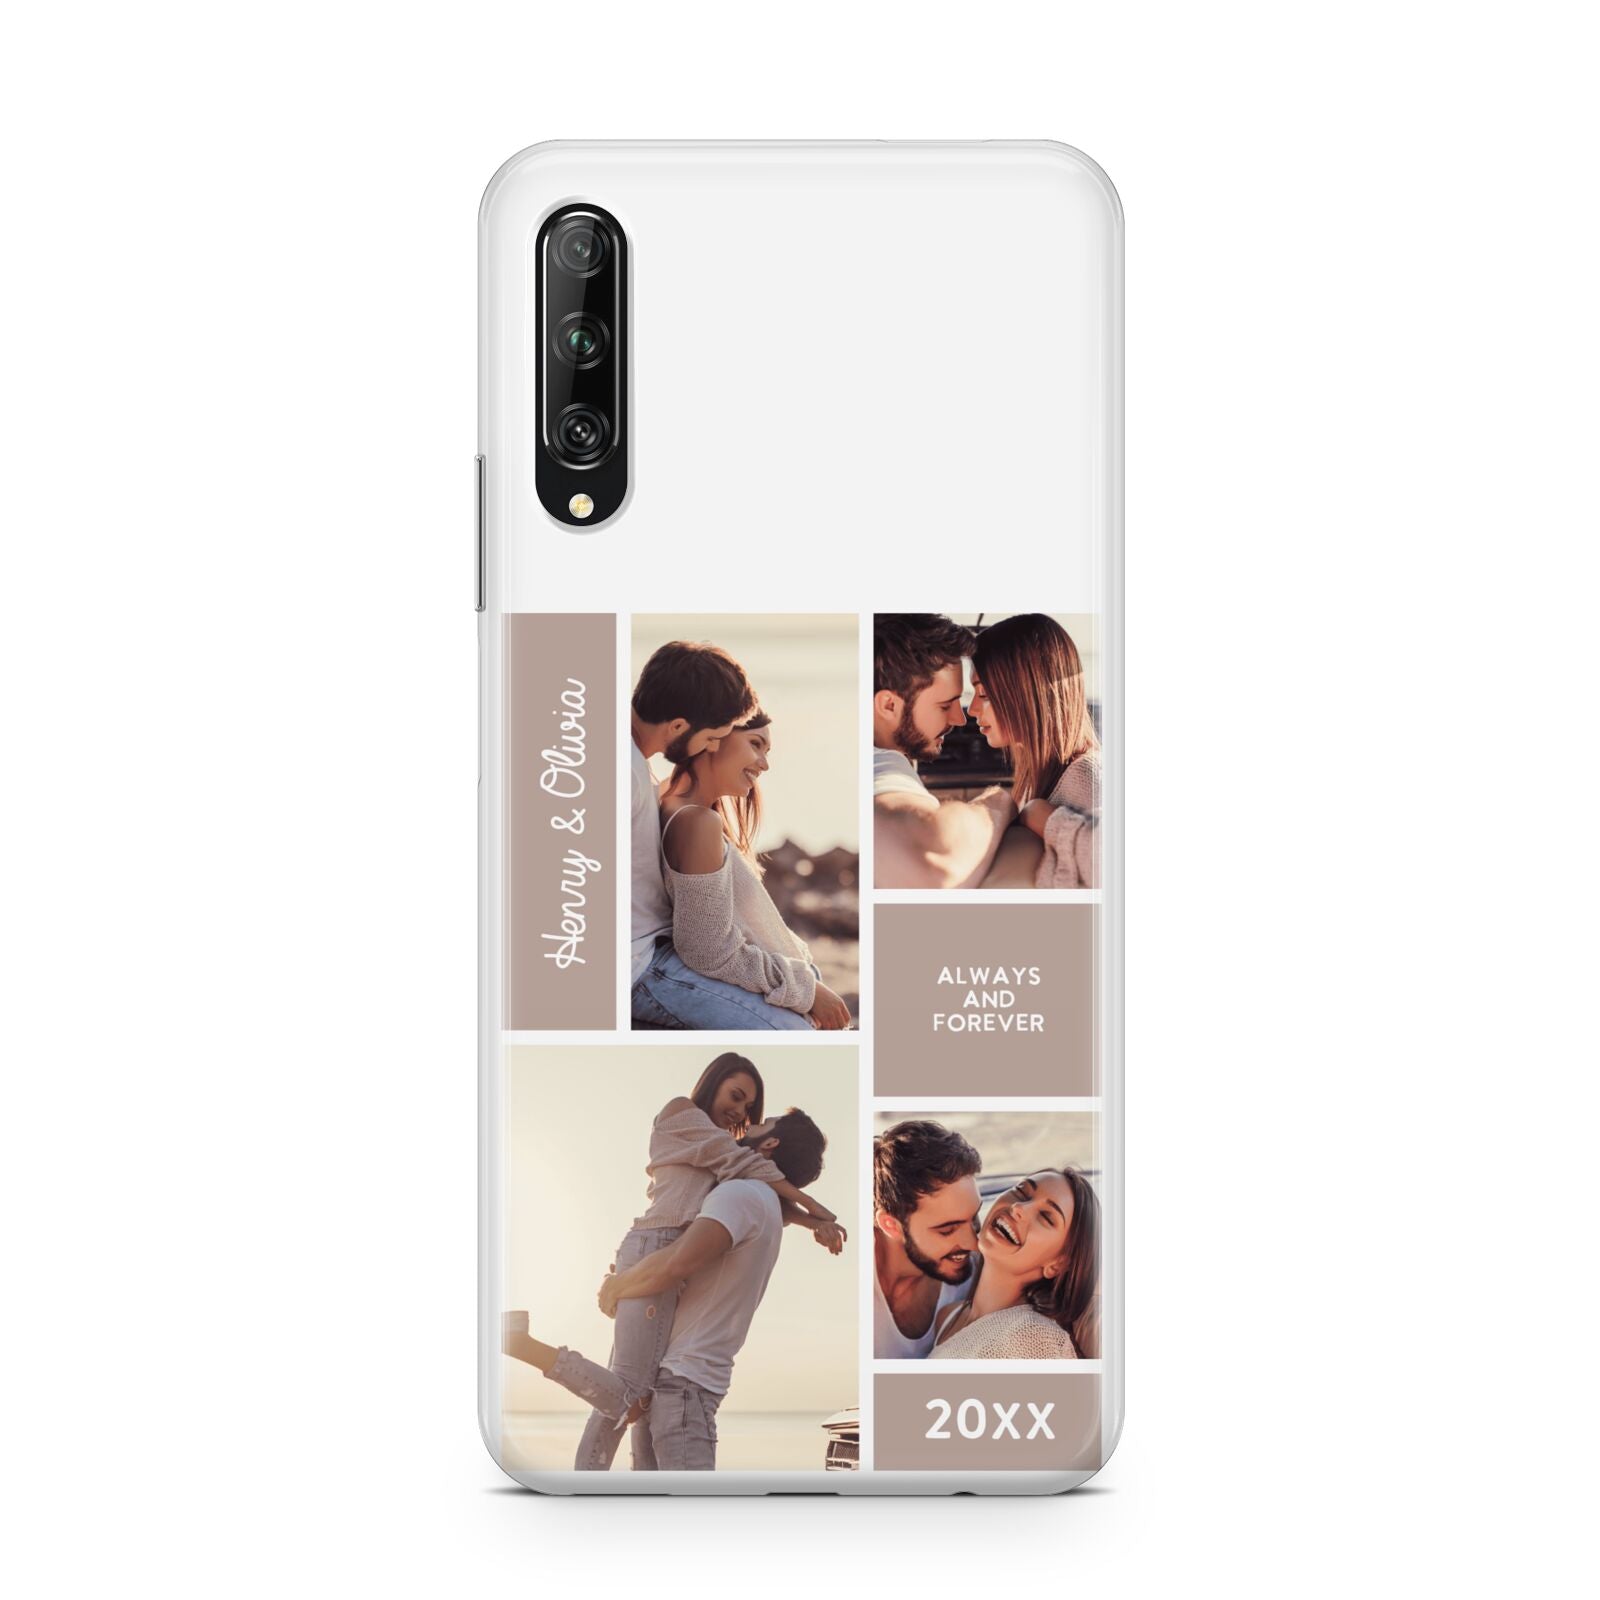 Couples Valentine Photo Collage Personalised Huawei P Smart Pro 2019